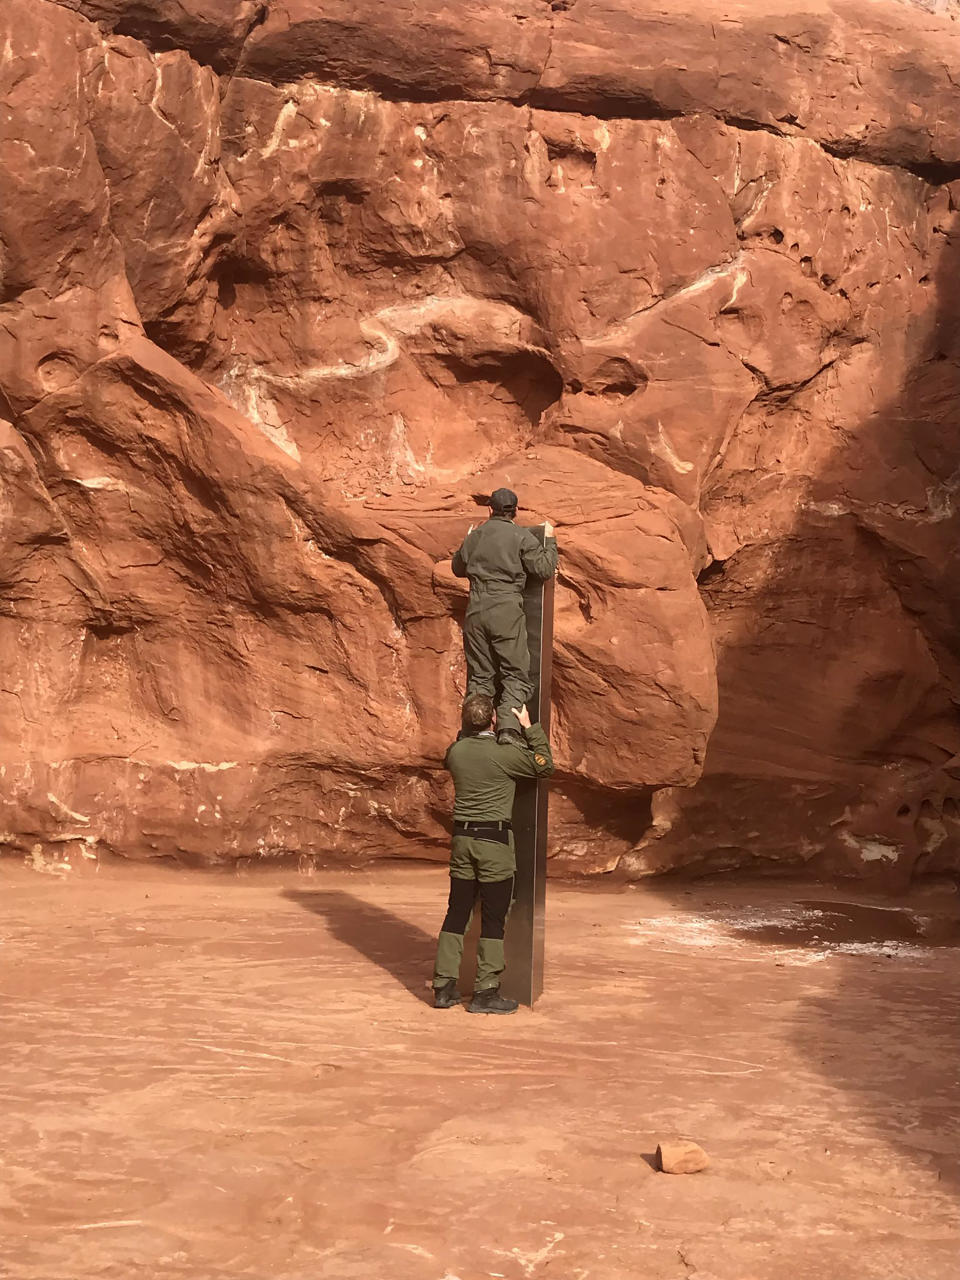 This Nov. 18, 2020 photo provided by the Utah Department of Public Safety shows Utah state workers checking out a metal monolith that was found installed in the ground in a remote area of red rock in Utah. The smooth, tall structure was found during a helicopter survey of bighorn sheep in southeastern Utah, officials said Monday. State workers from the Utah Department of Public Safety and Division of Wildlife Resources spotted the gleaming object from the air and landed nearby to check it out. The exact location is so remote that officials are not revealing it publicly, worried that people might get lost or stranded trying to find it and need to be rescued. (Utah Department of Public Safety via AP)